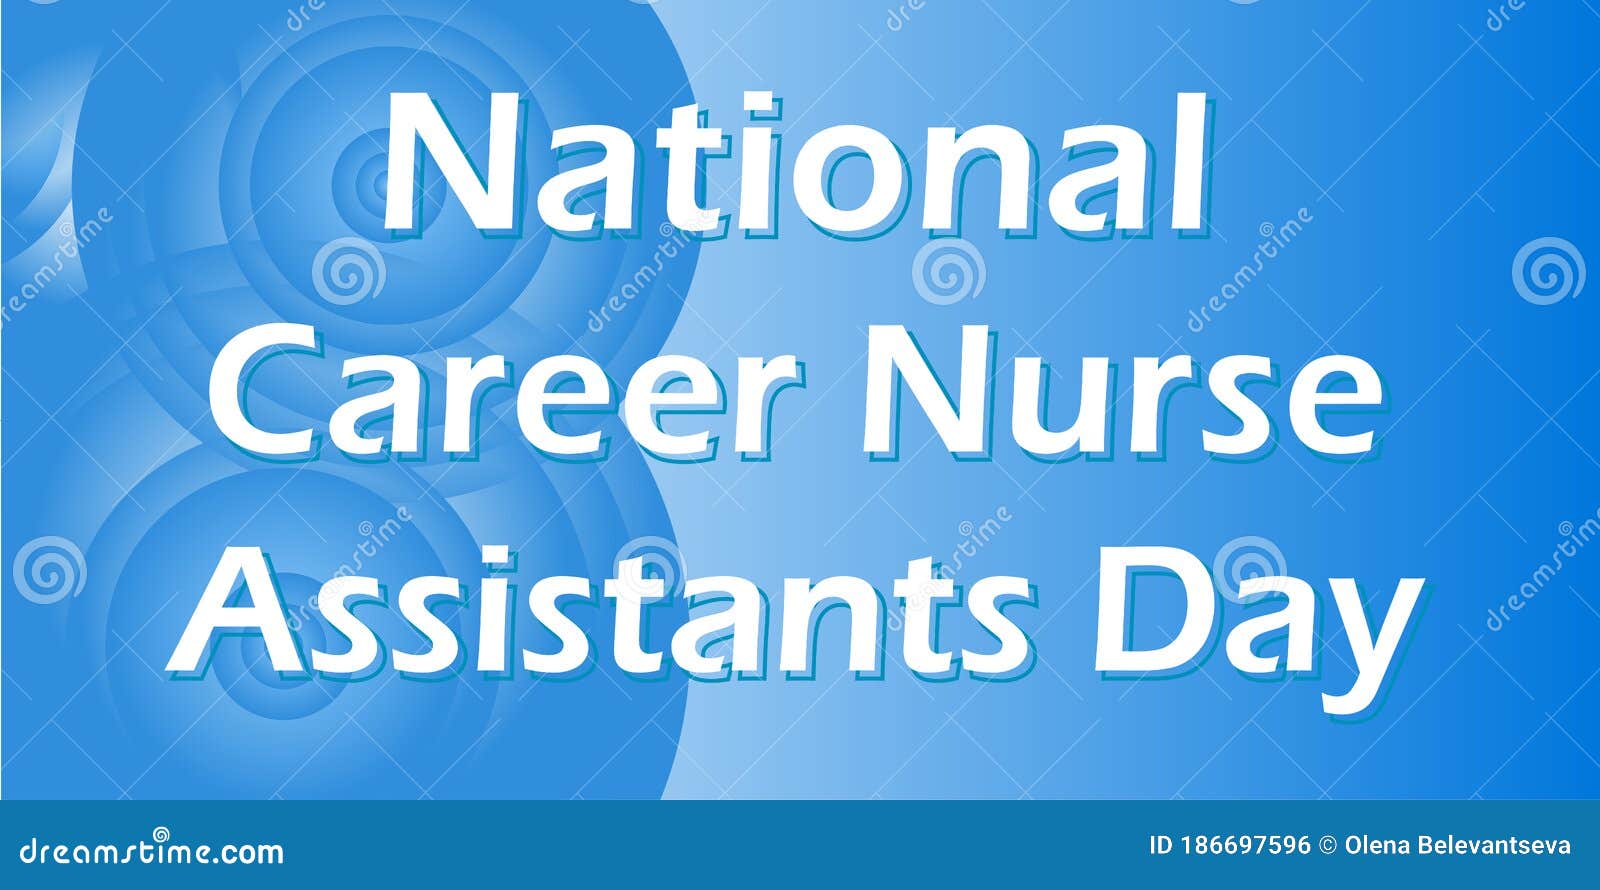 National Career Nurse Assistants Day Traditionally Celebrated in June